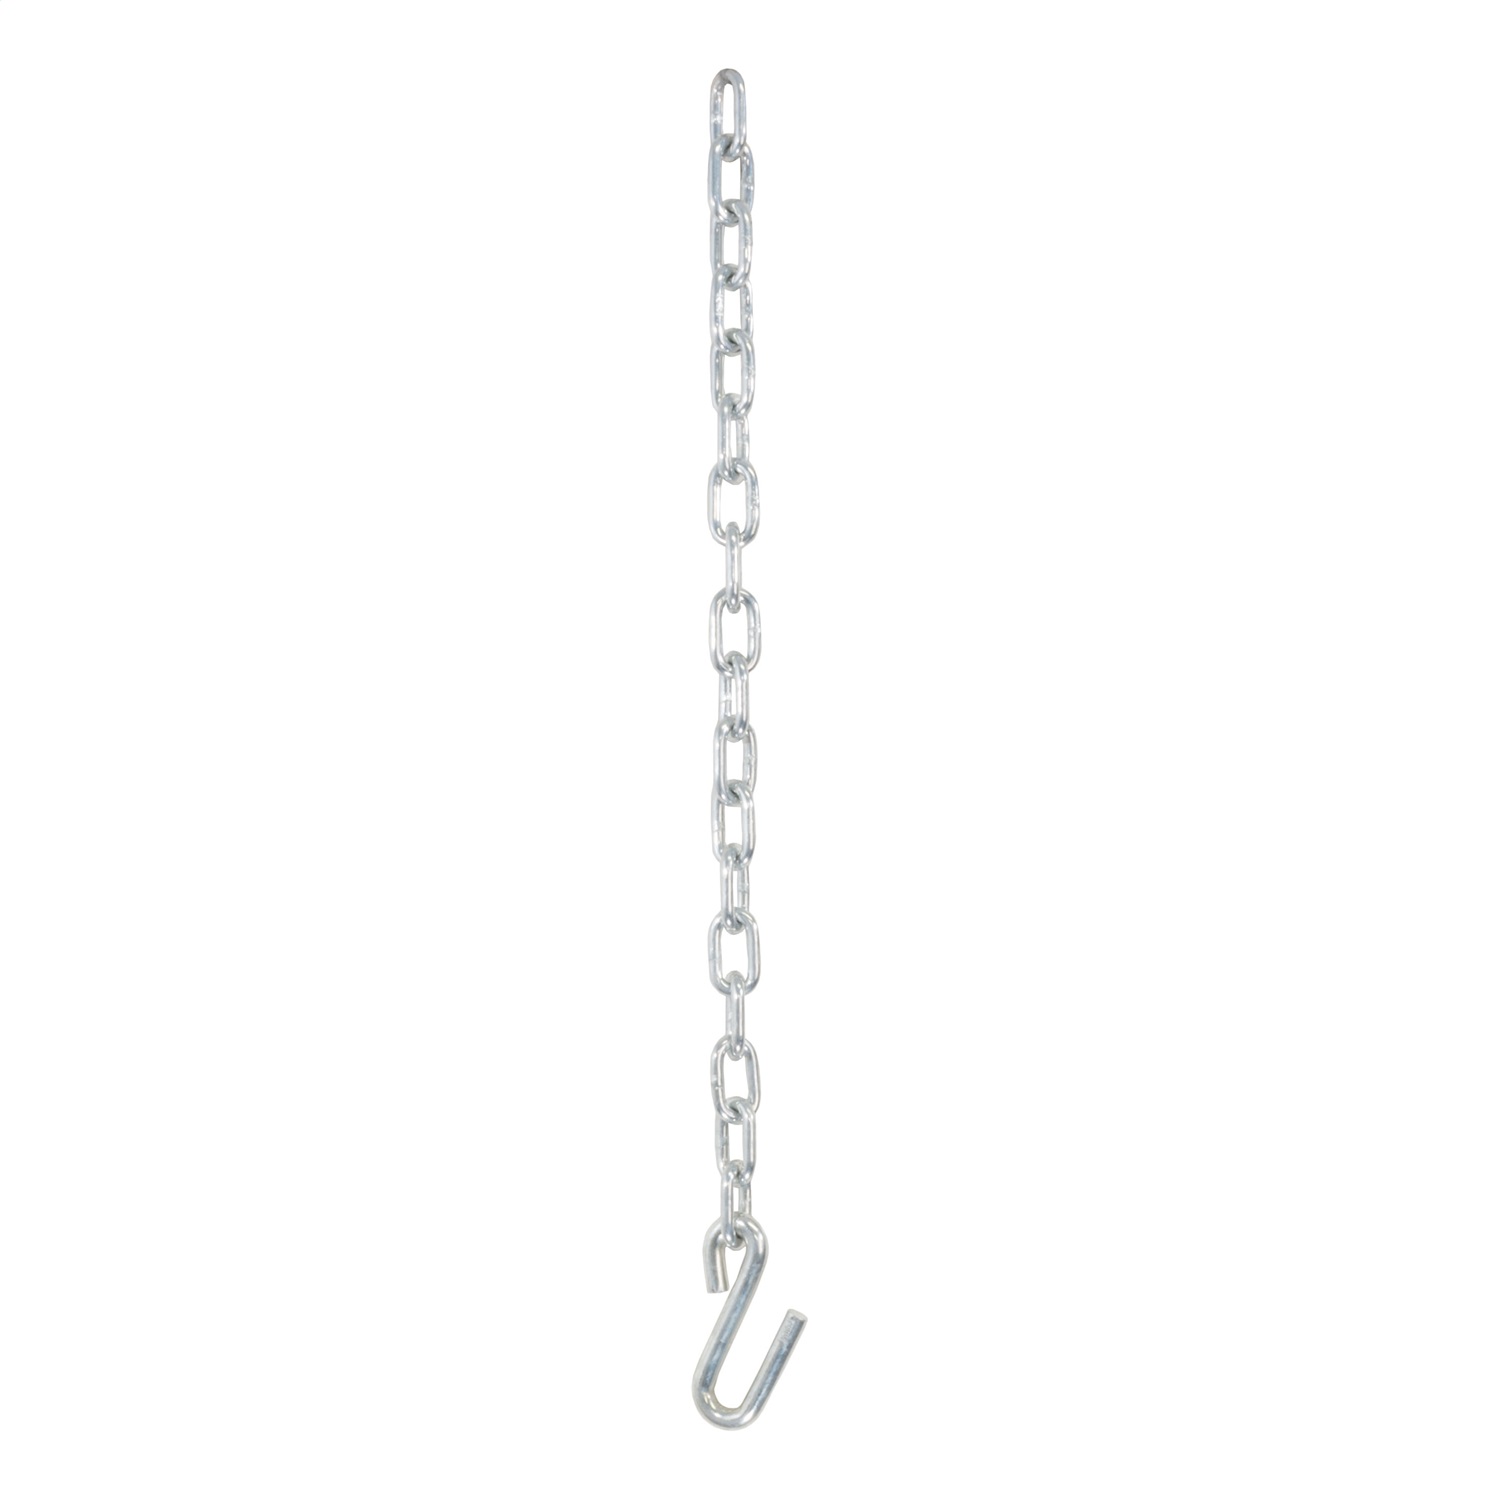 CURT Manufacturing CURT Manufacturing 80040 Safety Chain Assembly  Fits